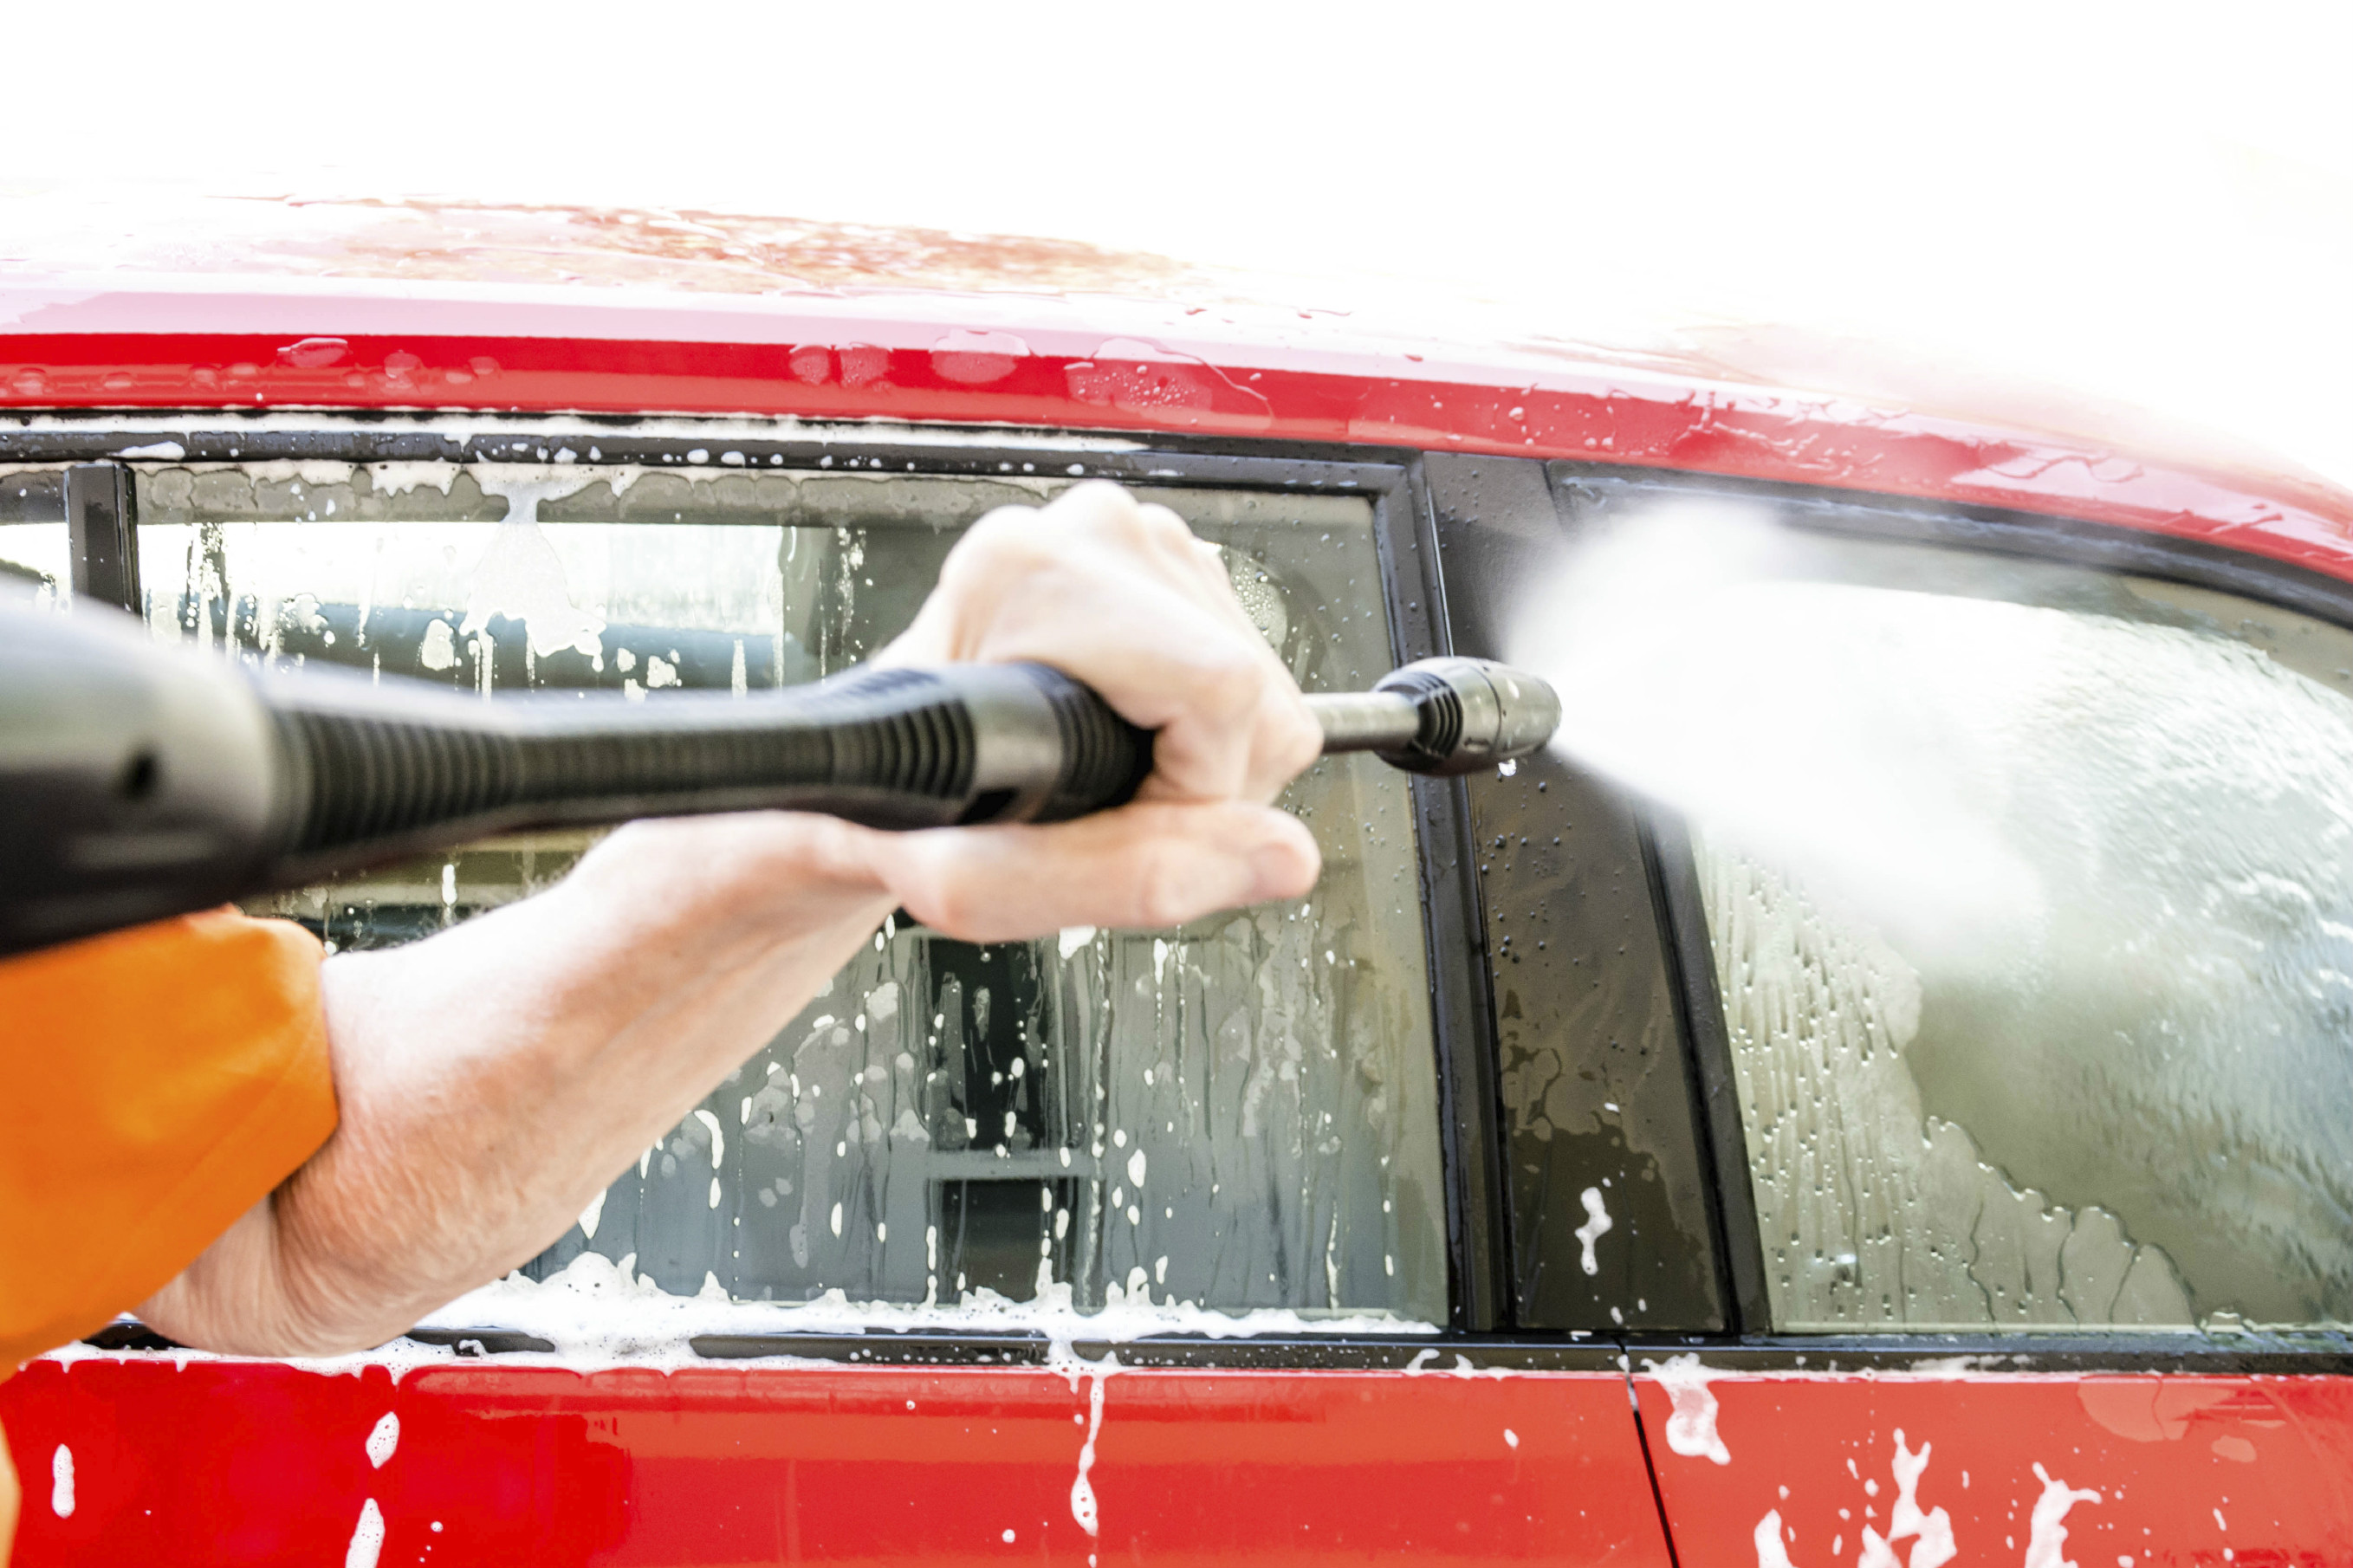 A pressure washer is an essential bit of kit for cleaning cars properly